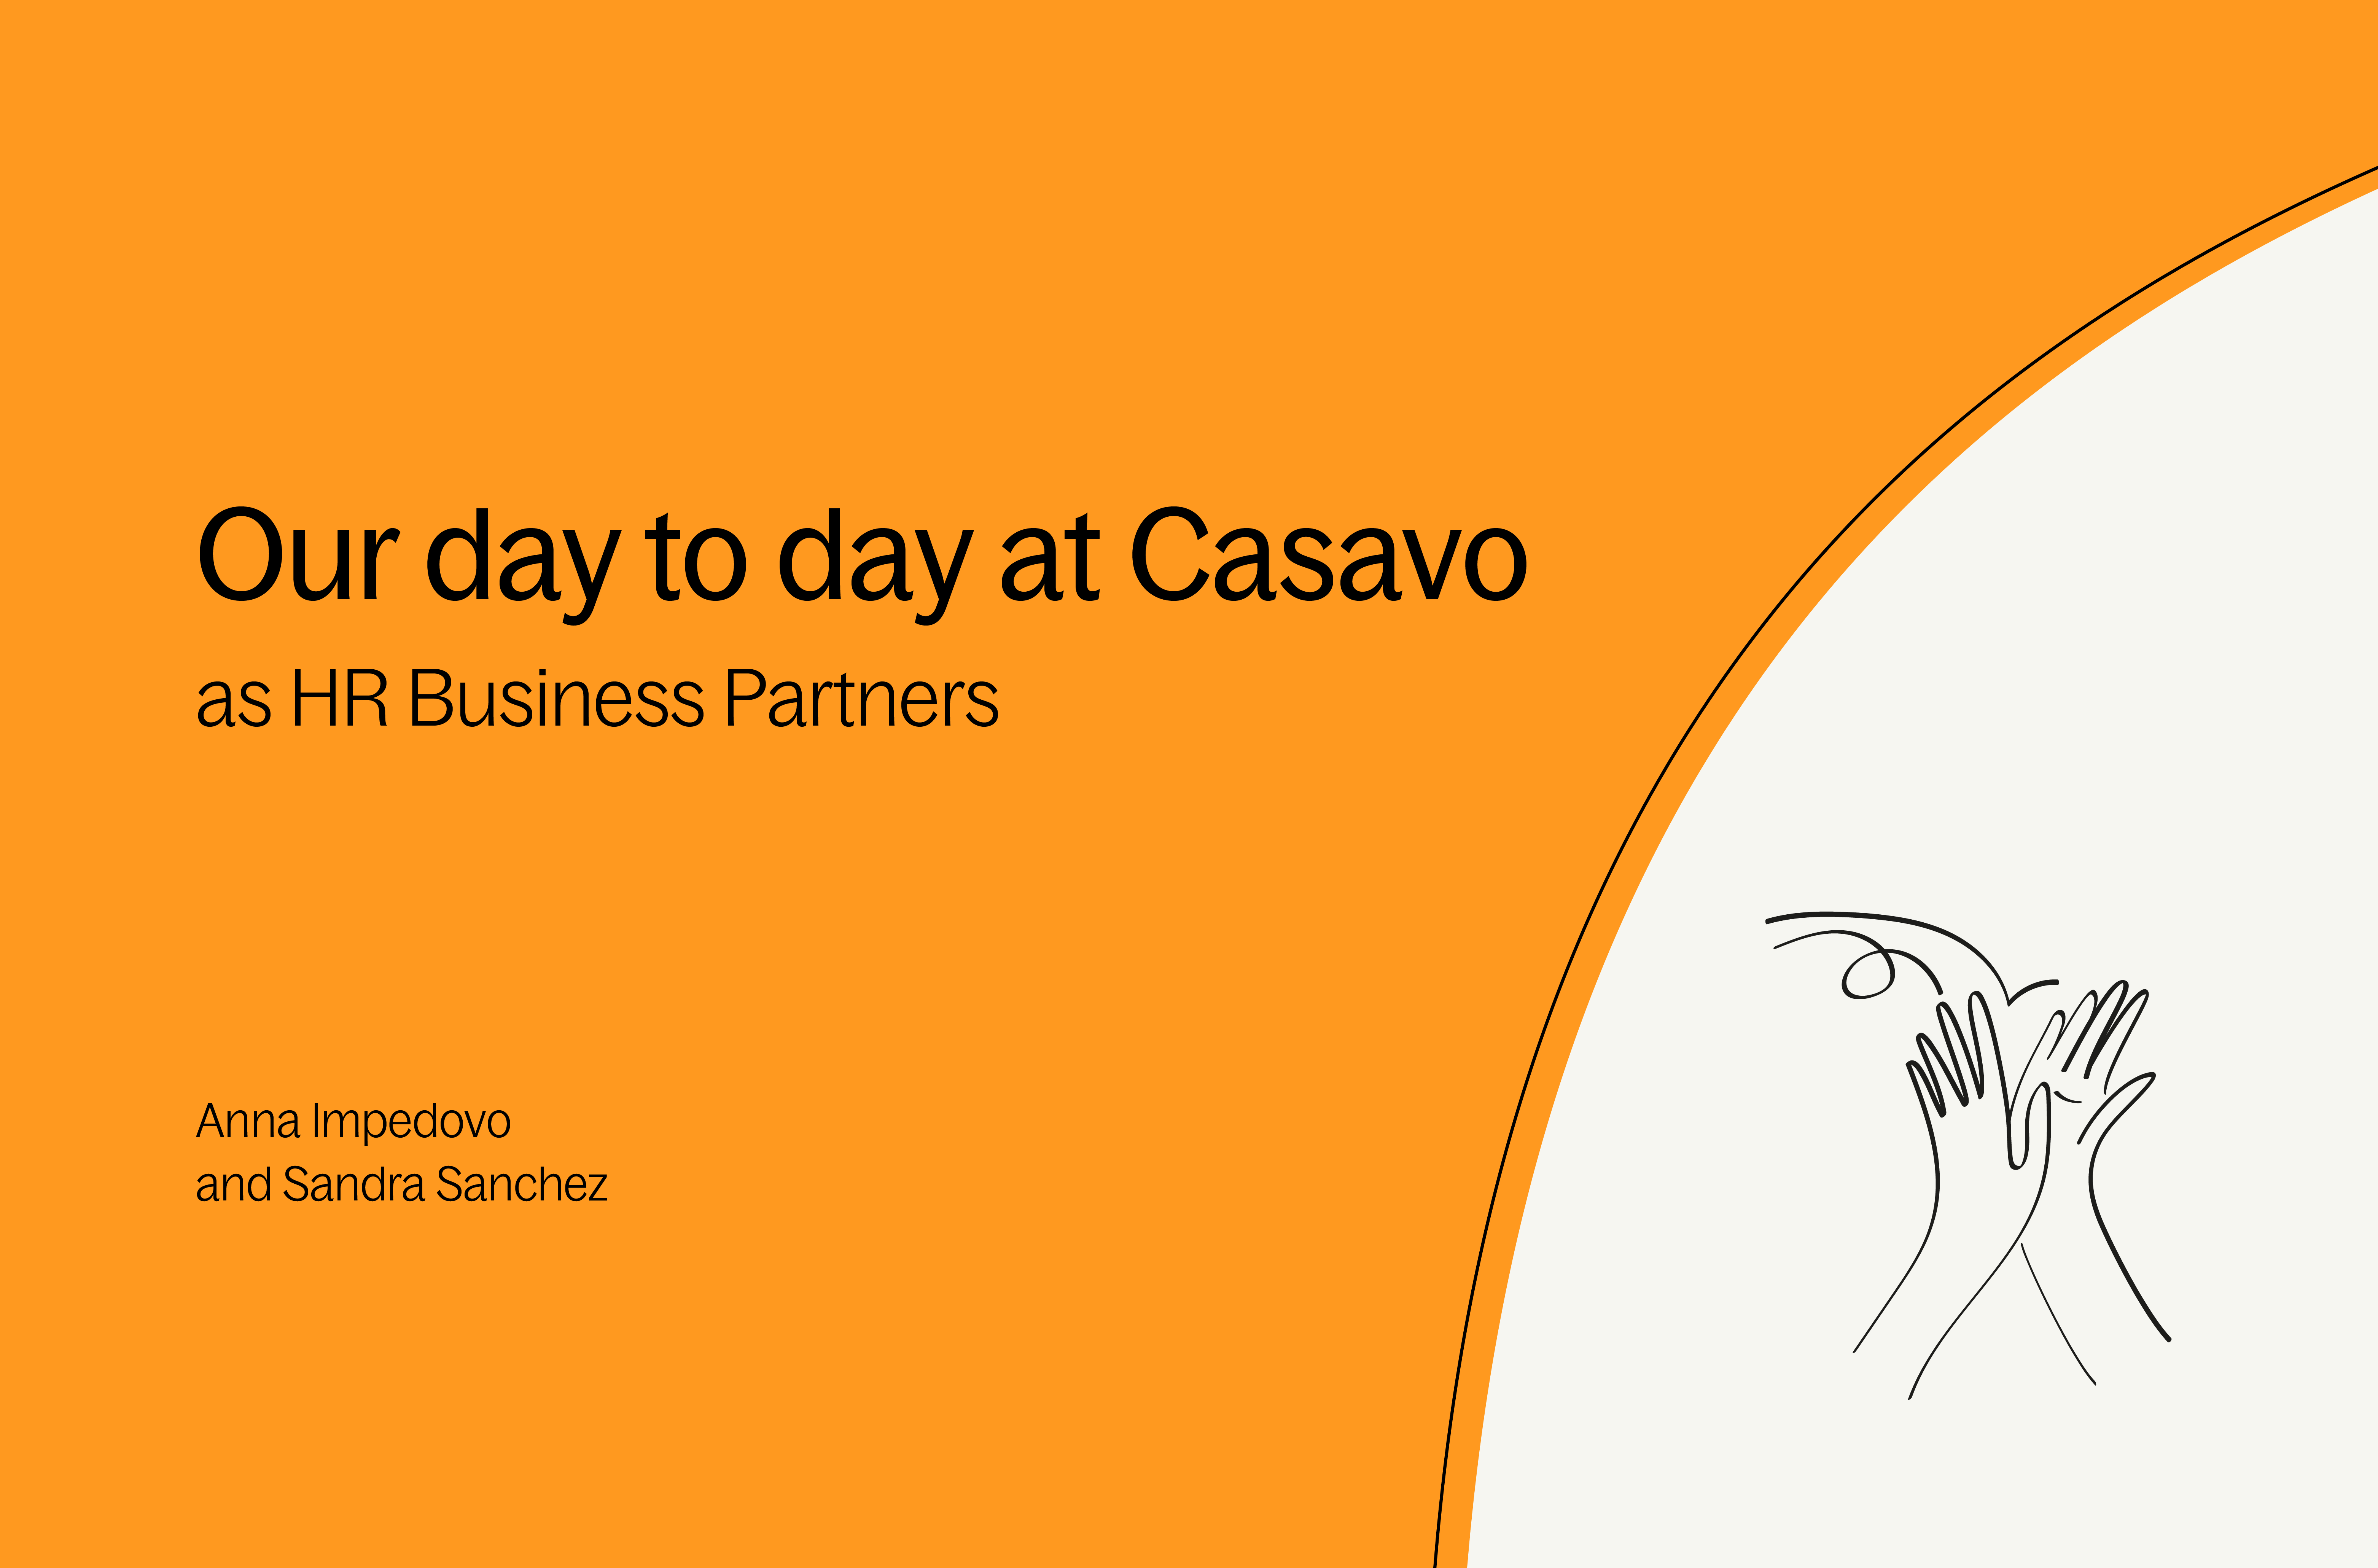 What does it mean to be an HR Business Partner at Casavo?